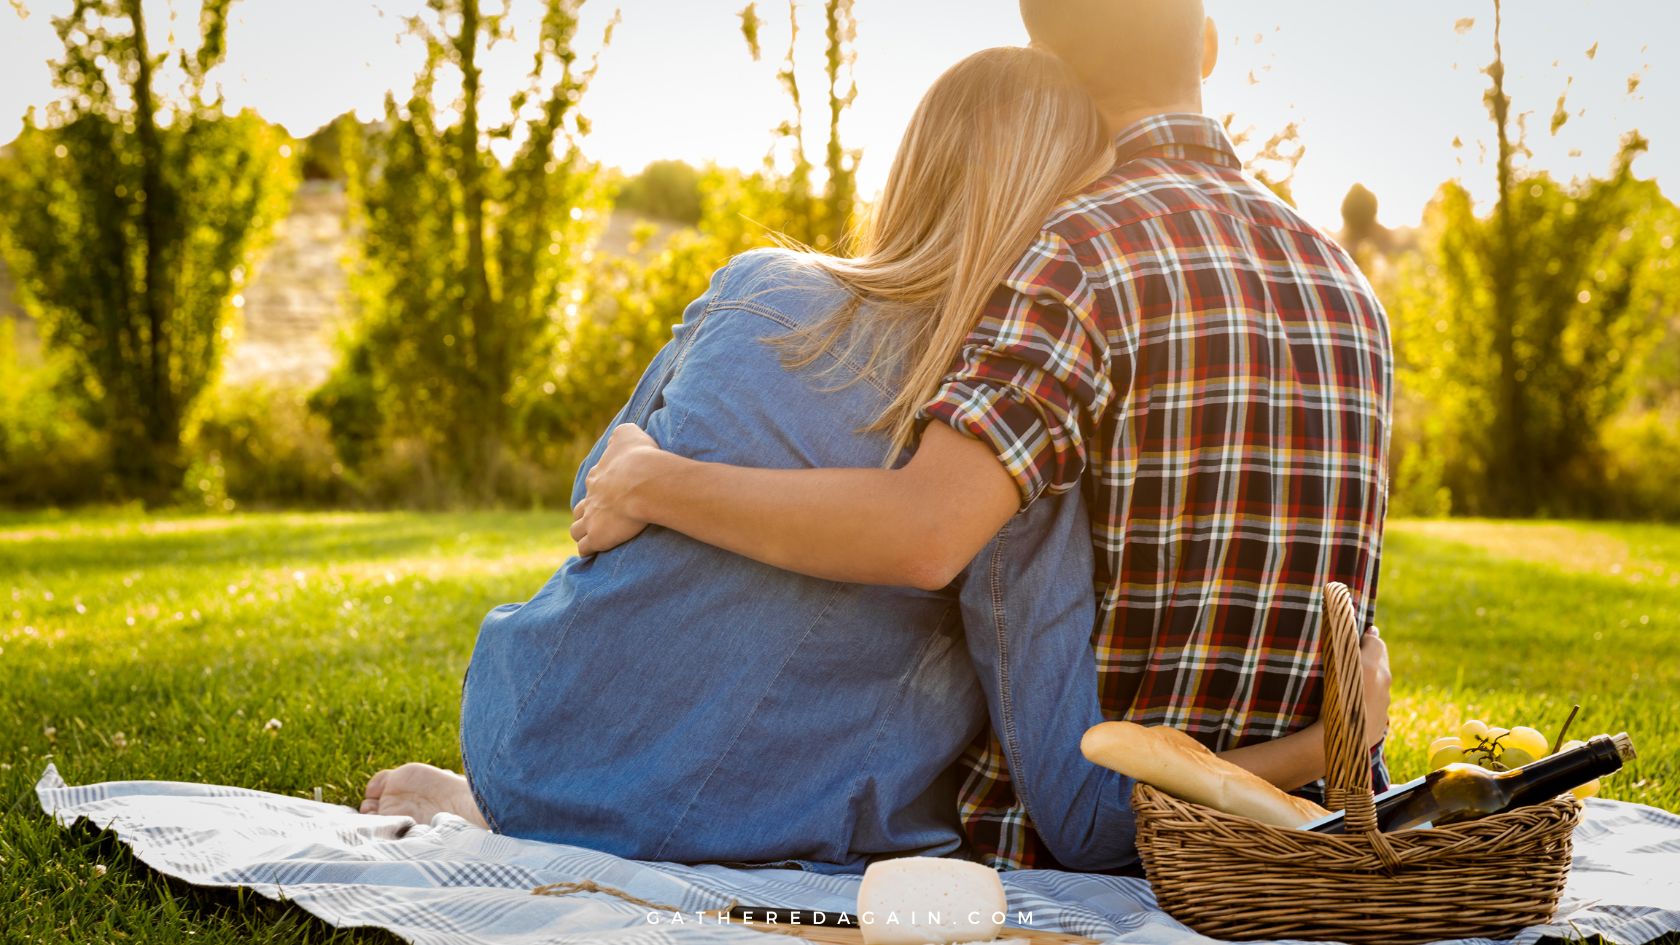 Couple hugging while enjoying a romantic picnic in the sunshine.